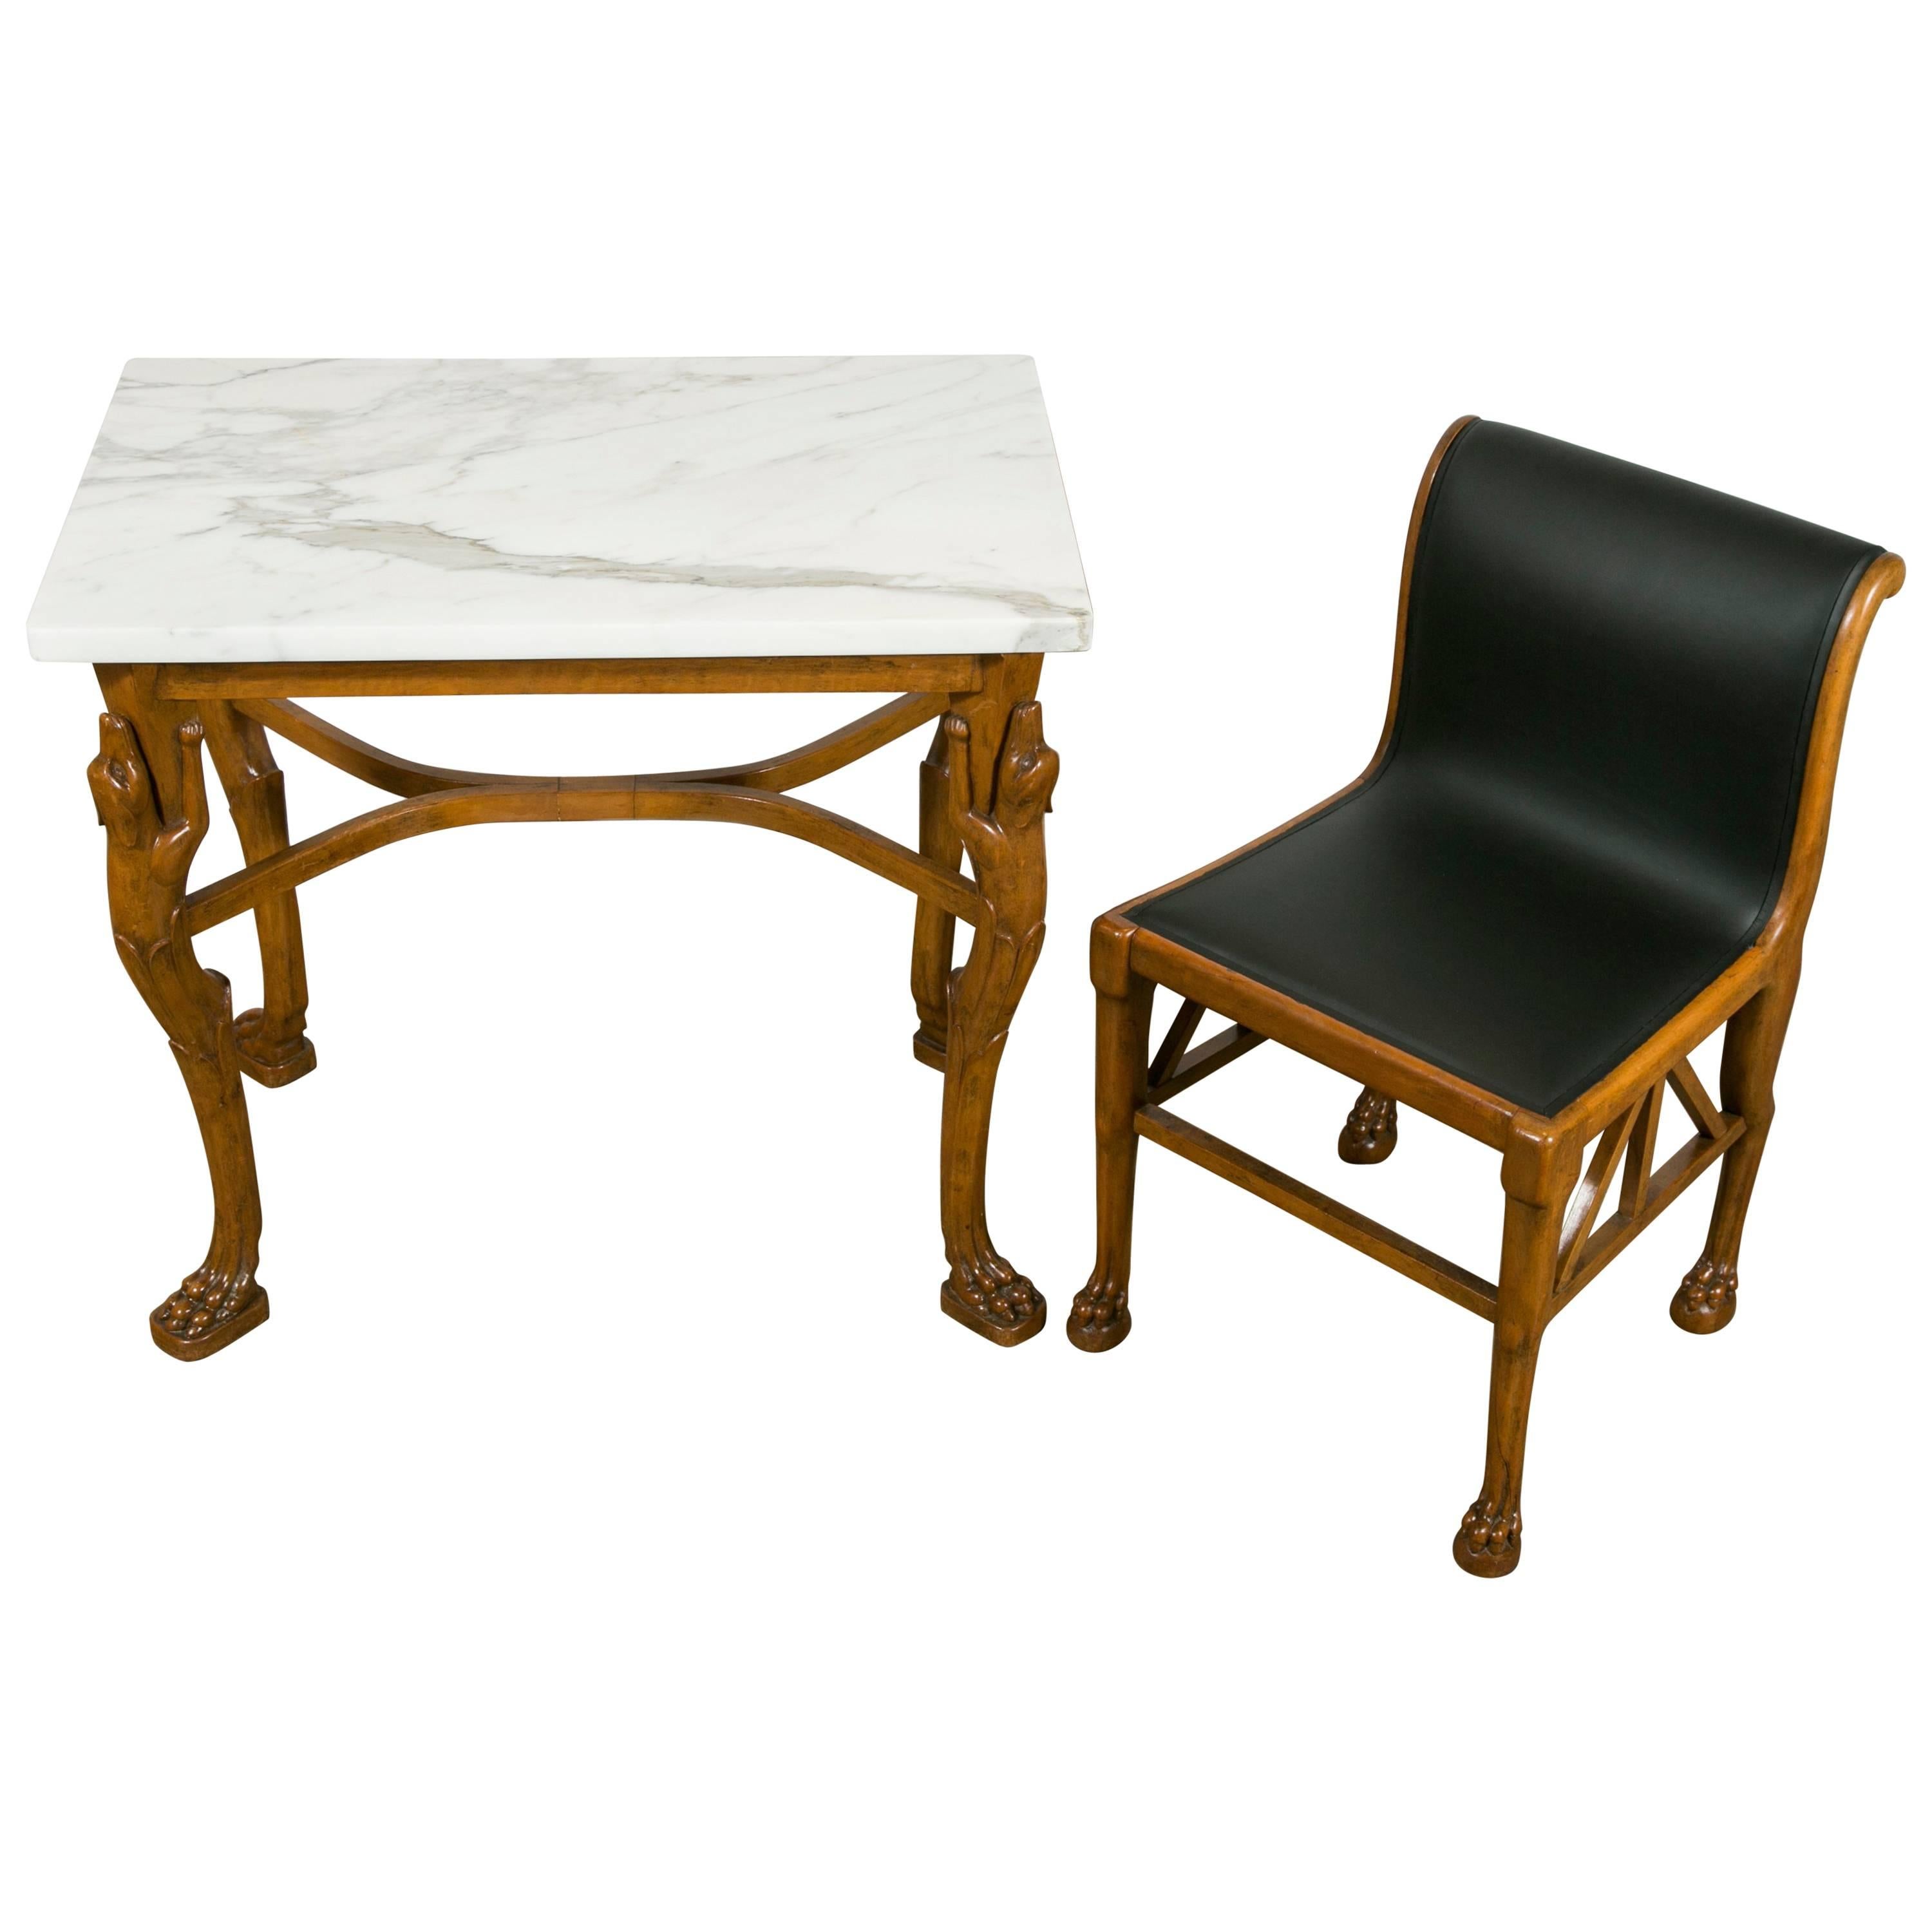 Wood Table and Chair in the Pompeian Style, Italy, circa 1920